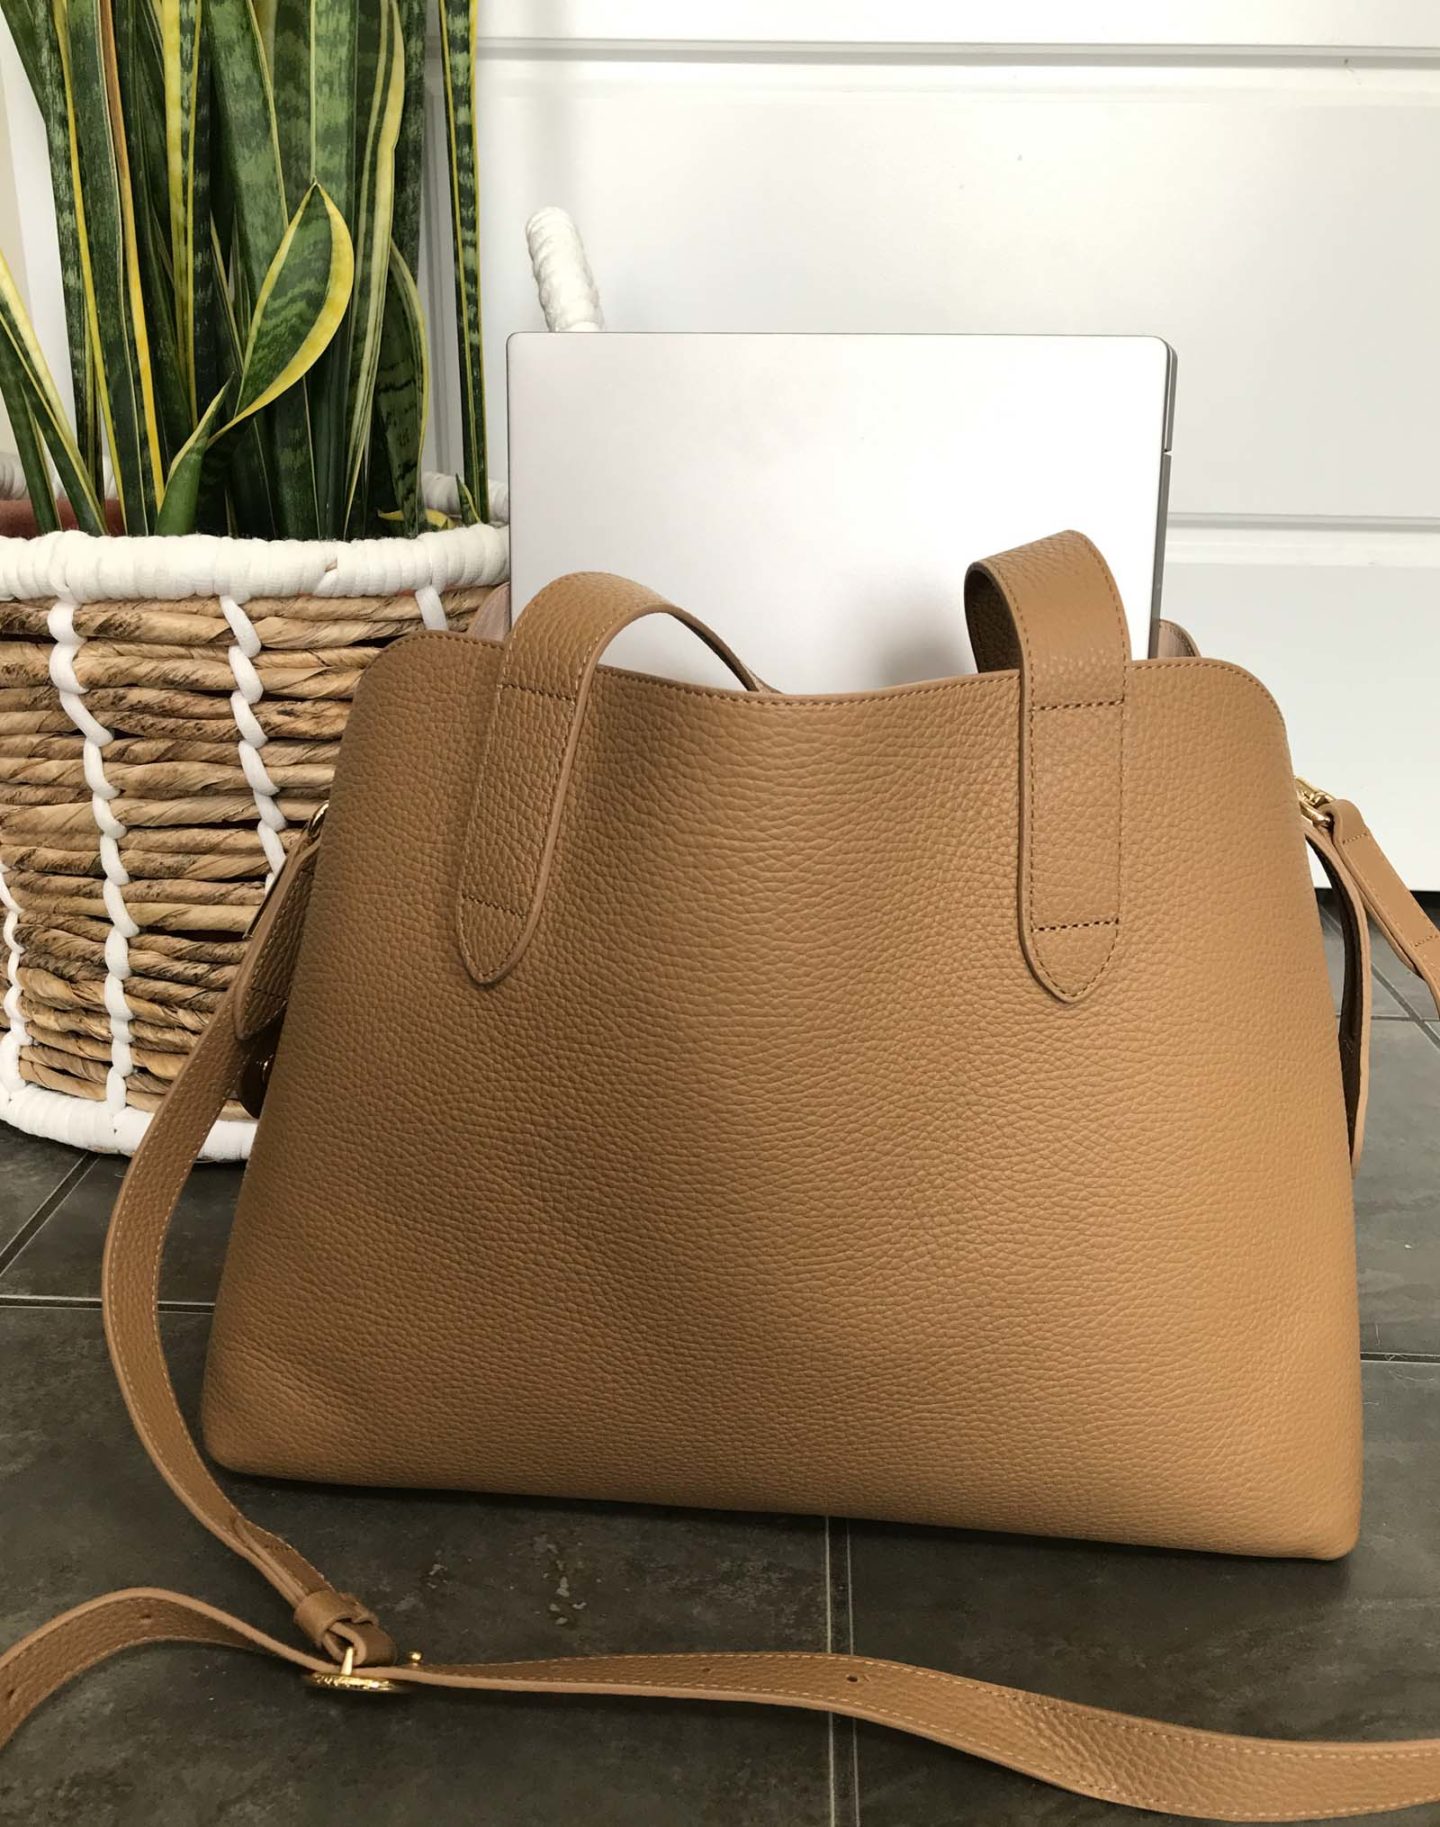 cuyana zippered satchel review